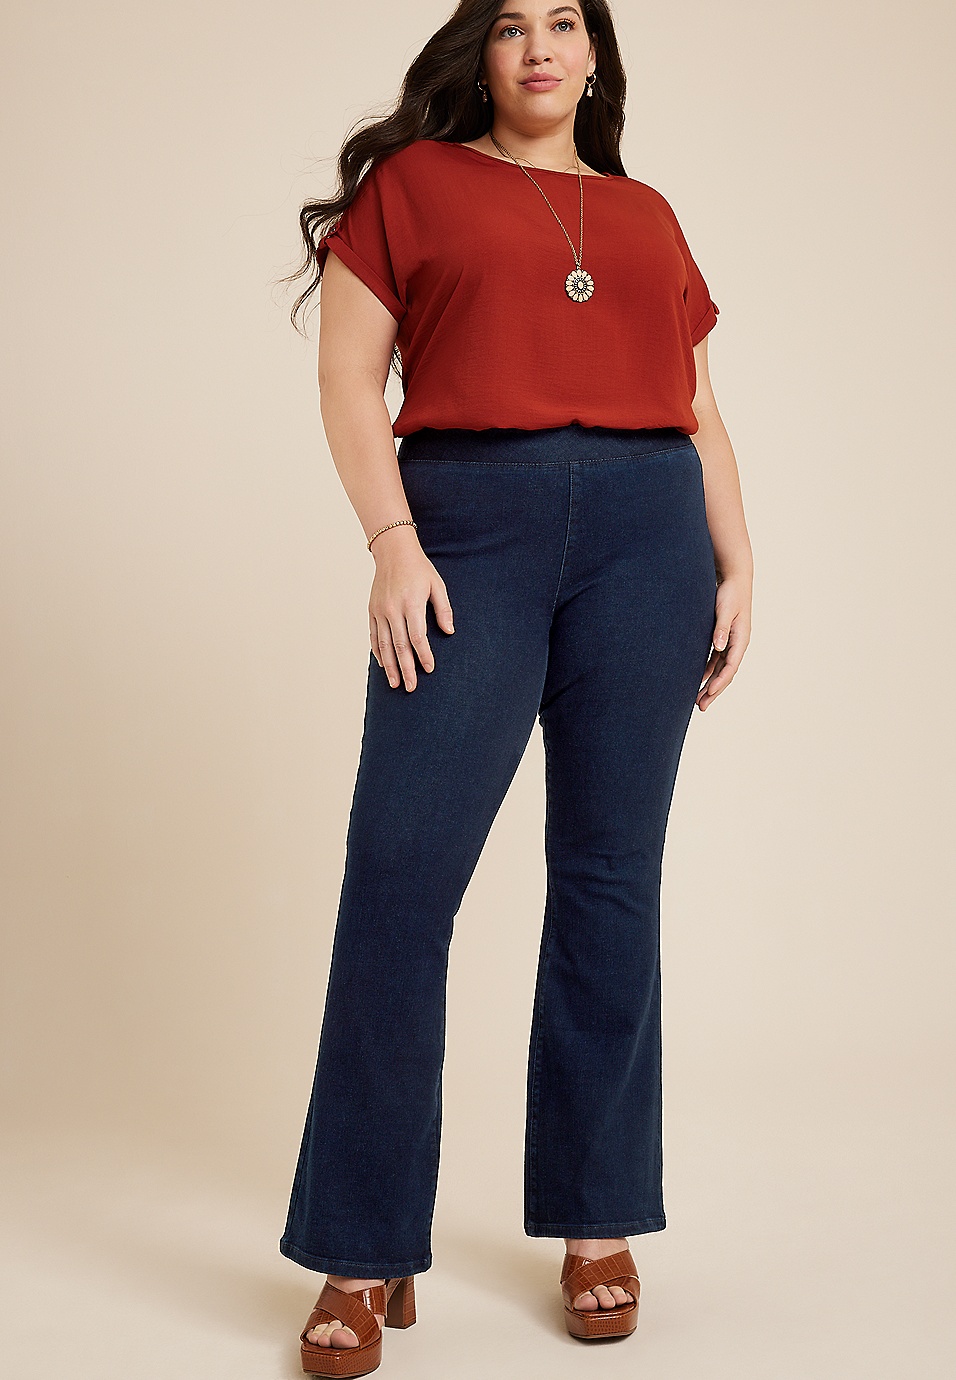 High waisted flare plus size jeans